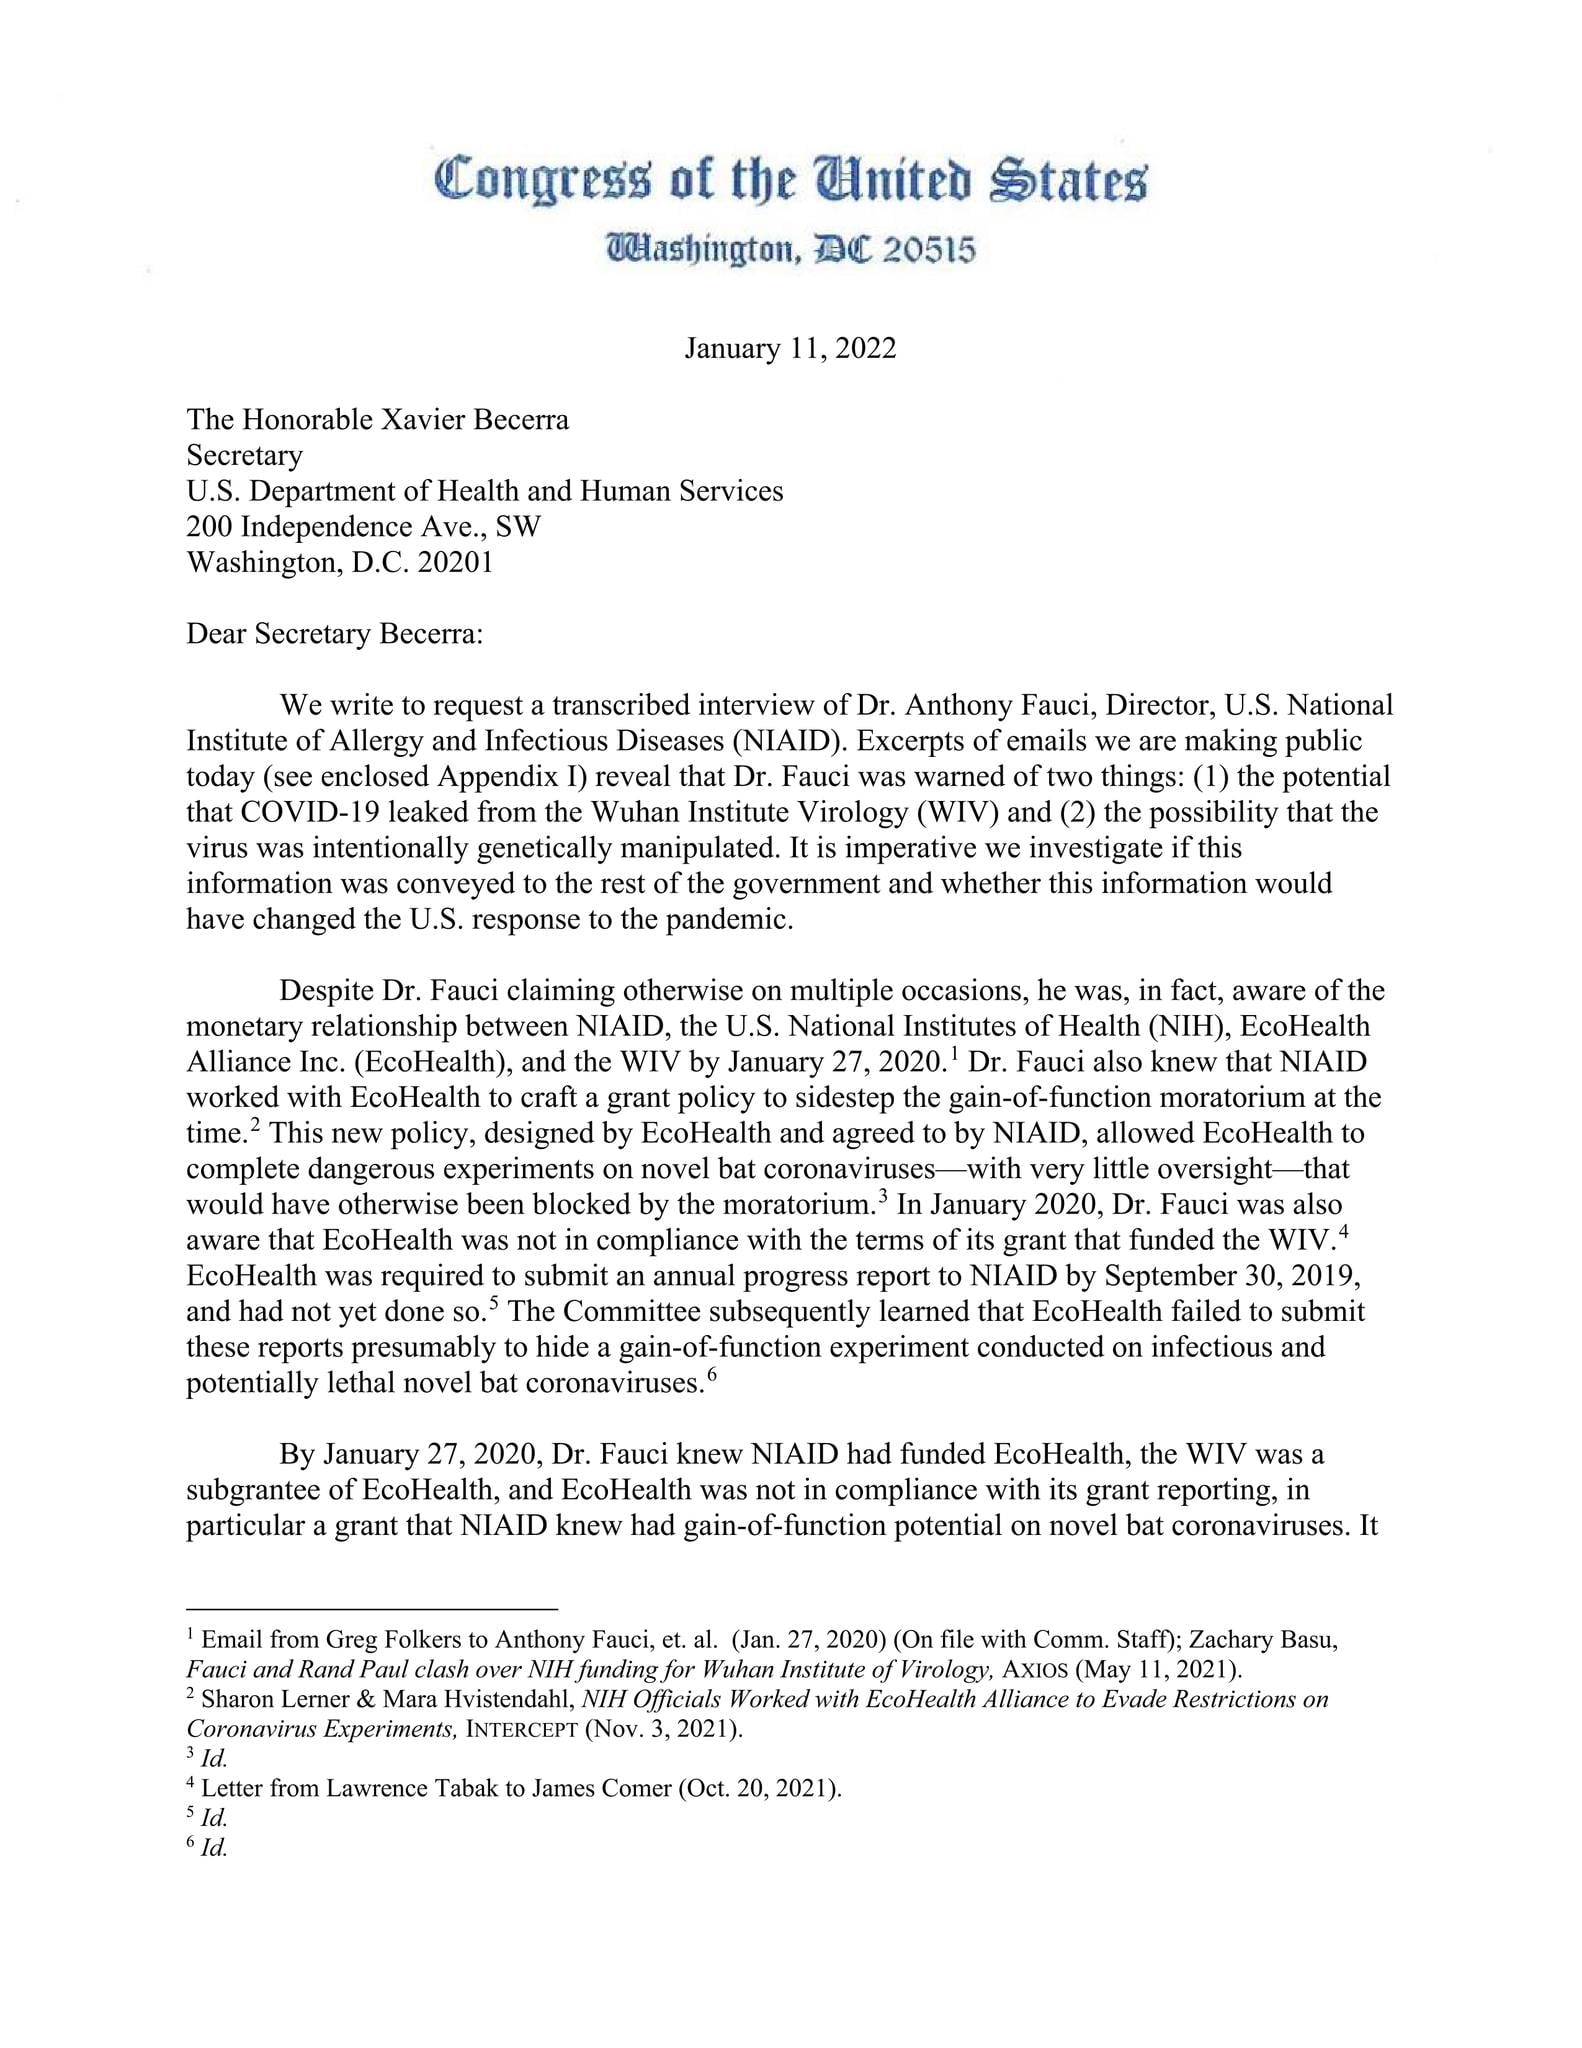 House Oversight Committee Republicans, Fauci emails downplaying Wuhan lab...